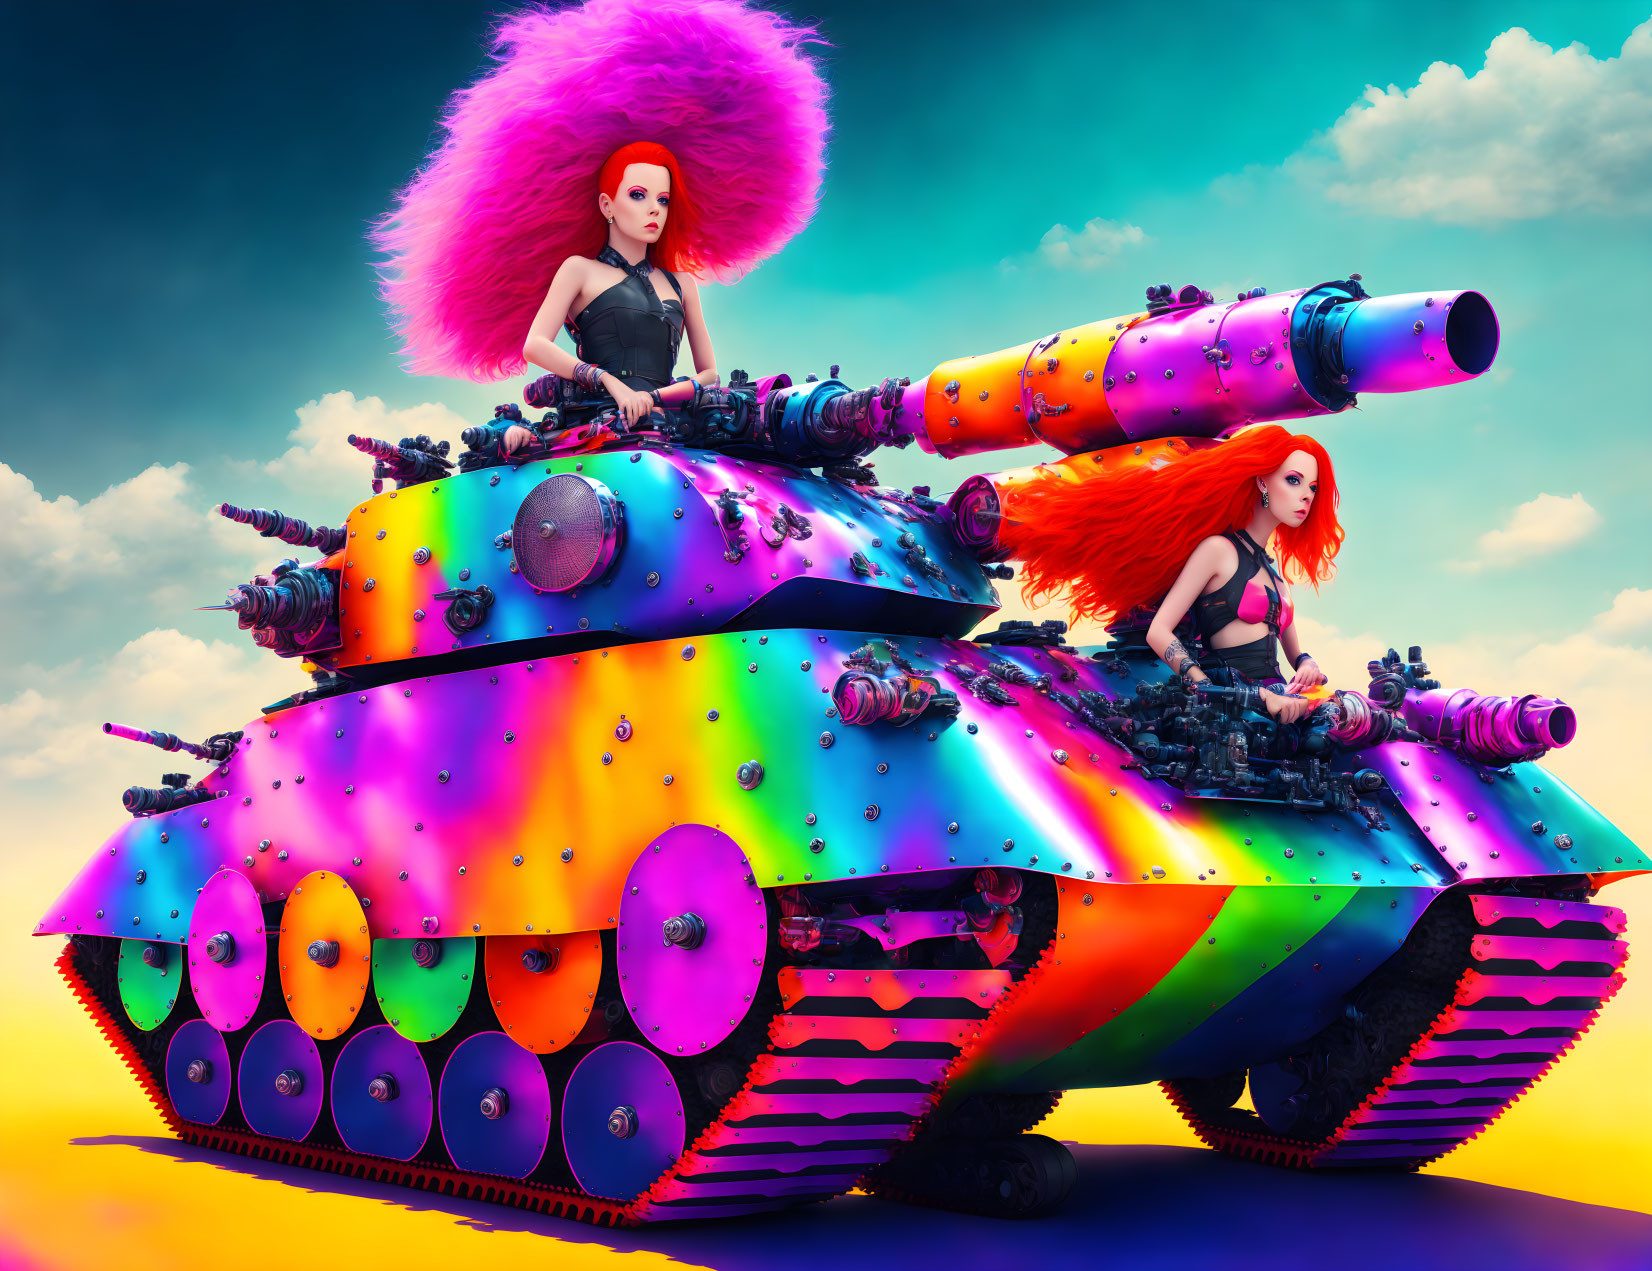 Colorful Tank with Polka Dots and Stripes, Two Women with Exaggerated Hairstyles